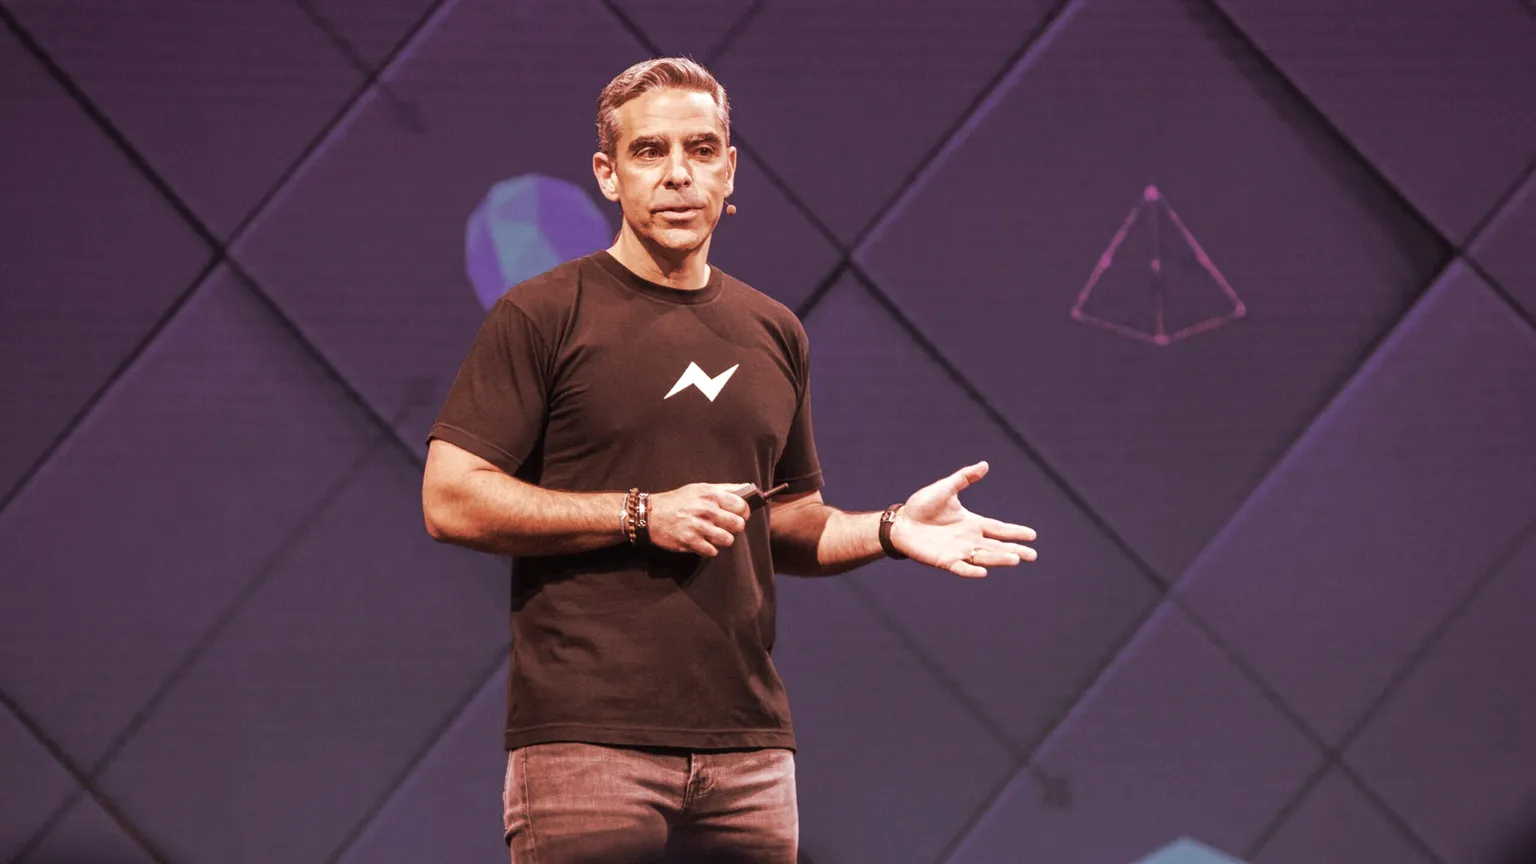 David Marcus, head of Novi crypto wallet at Facebook, speaks in 2017 when he was in charge of Facebook Messenger. Photo: Anthony Quintano on Flickr (CC BY 2.0)